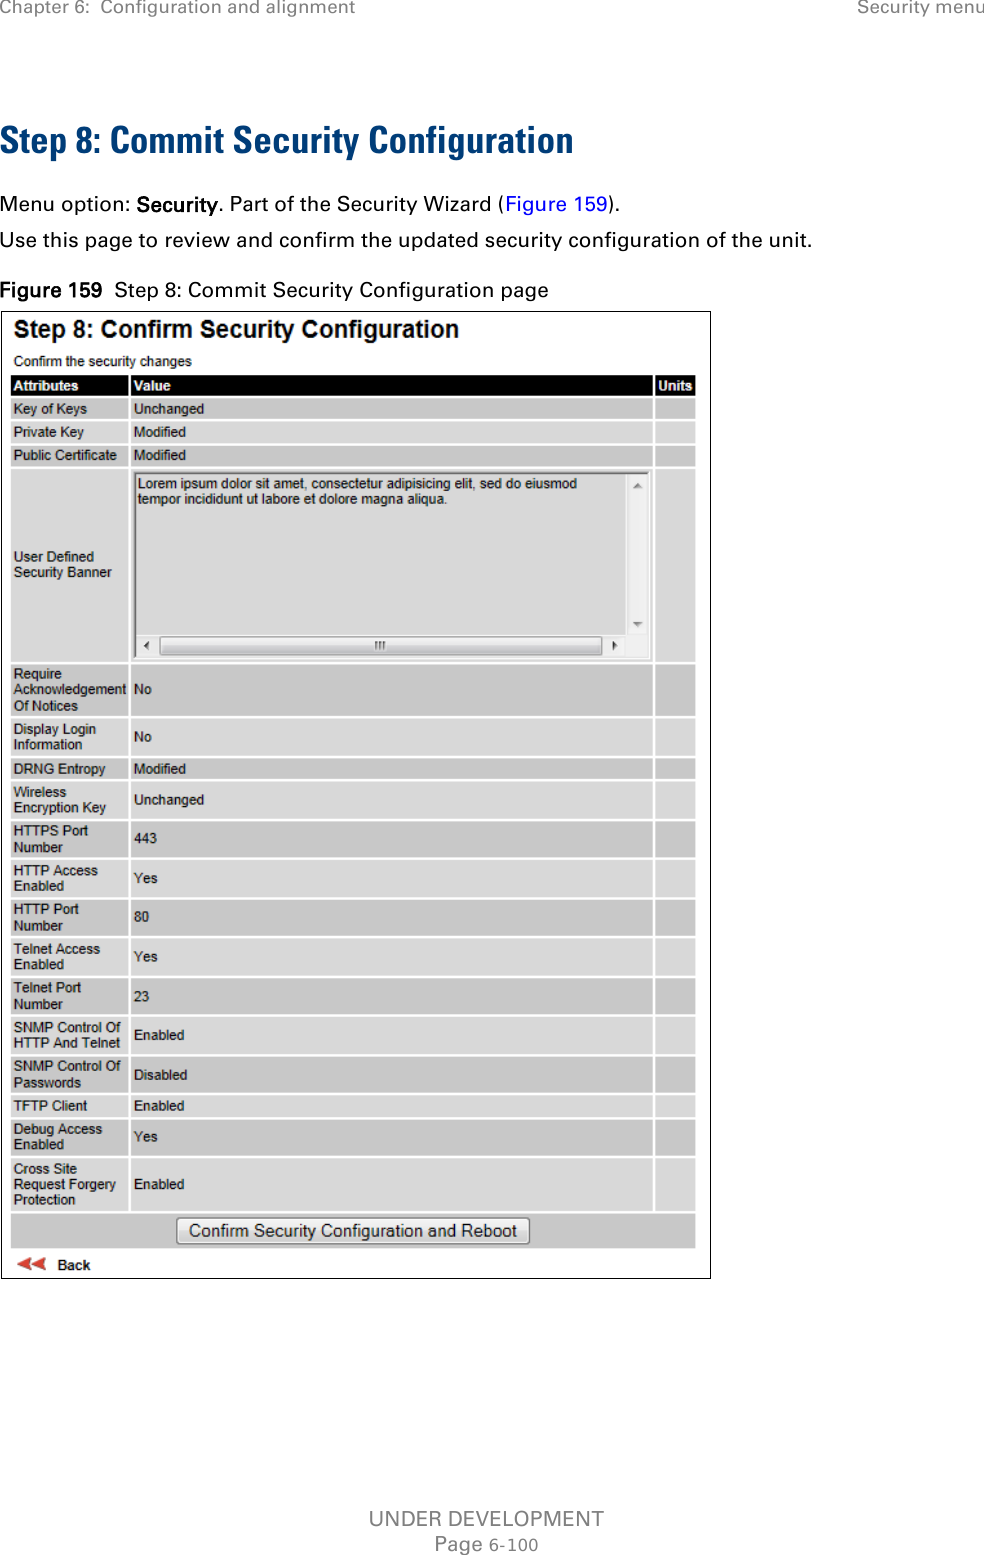 Chapter 6:  Configuration and alignment Security menu  Step 8: Commit Security Configuration Menu option: Security. Part of the Security Wizard (Figure 159). Use this page to review and confirm the updated security configuration of the unit. Figure 159  Step 8: Commit Security Configuration page  UNDER DEVELOPMENT Page 6-100 